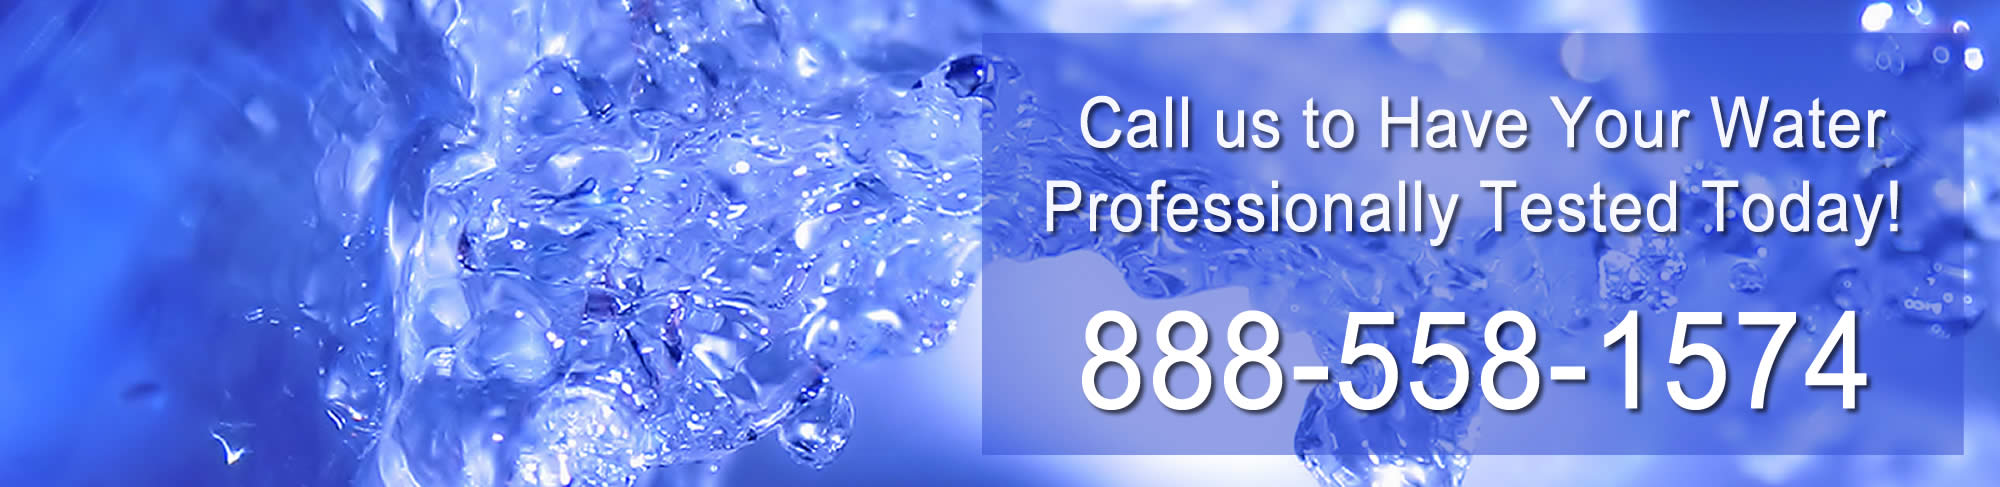 Specializing in Shelton CT Water Testing and Analysis